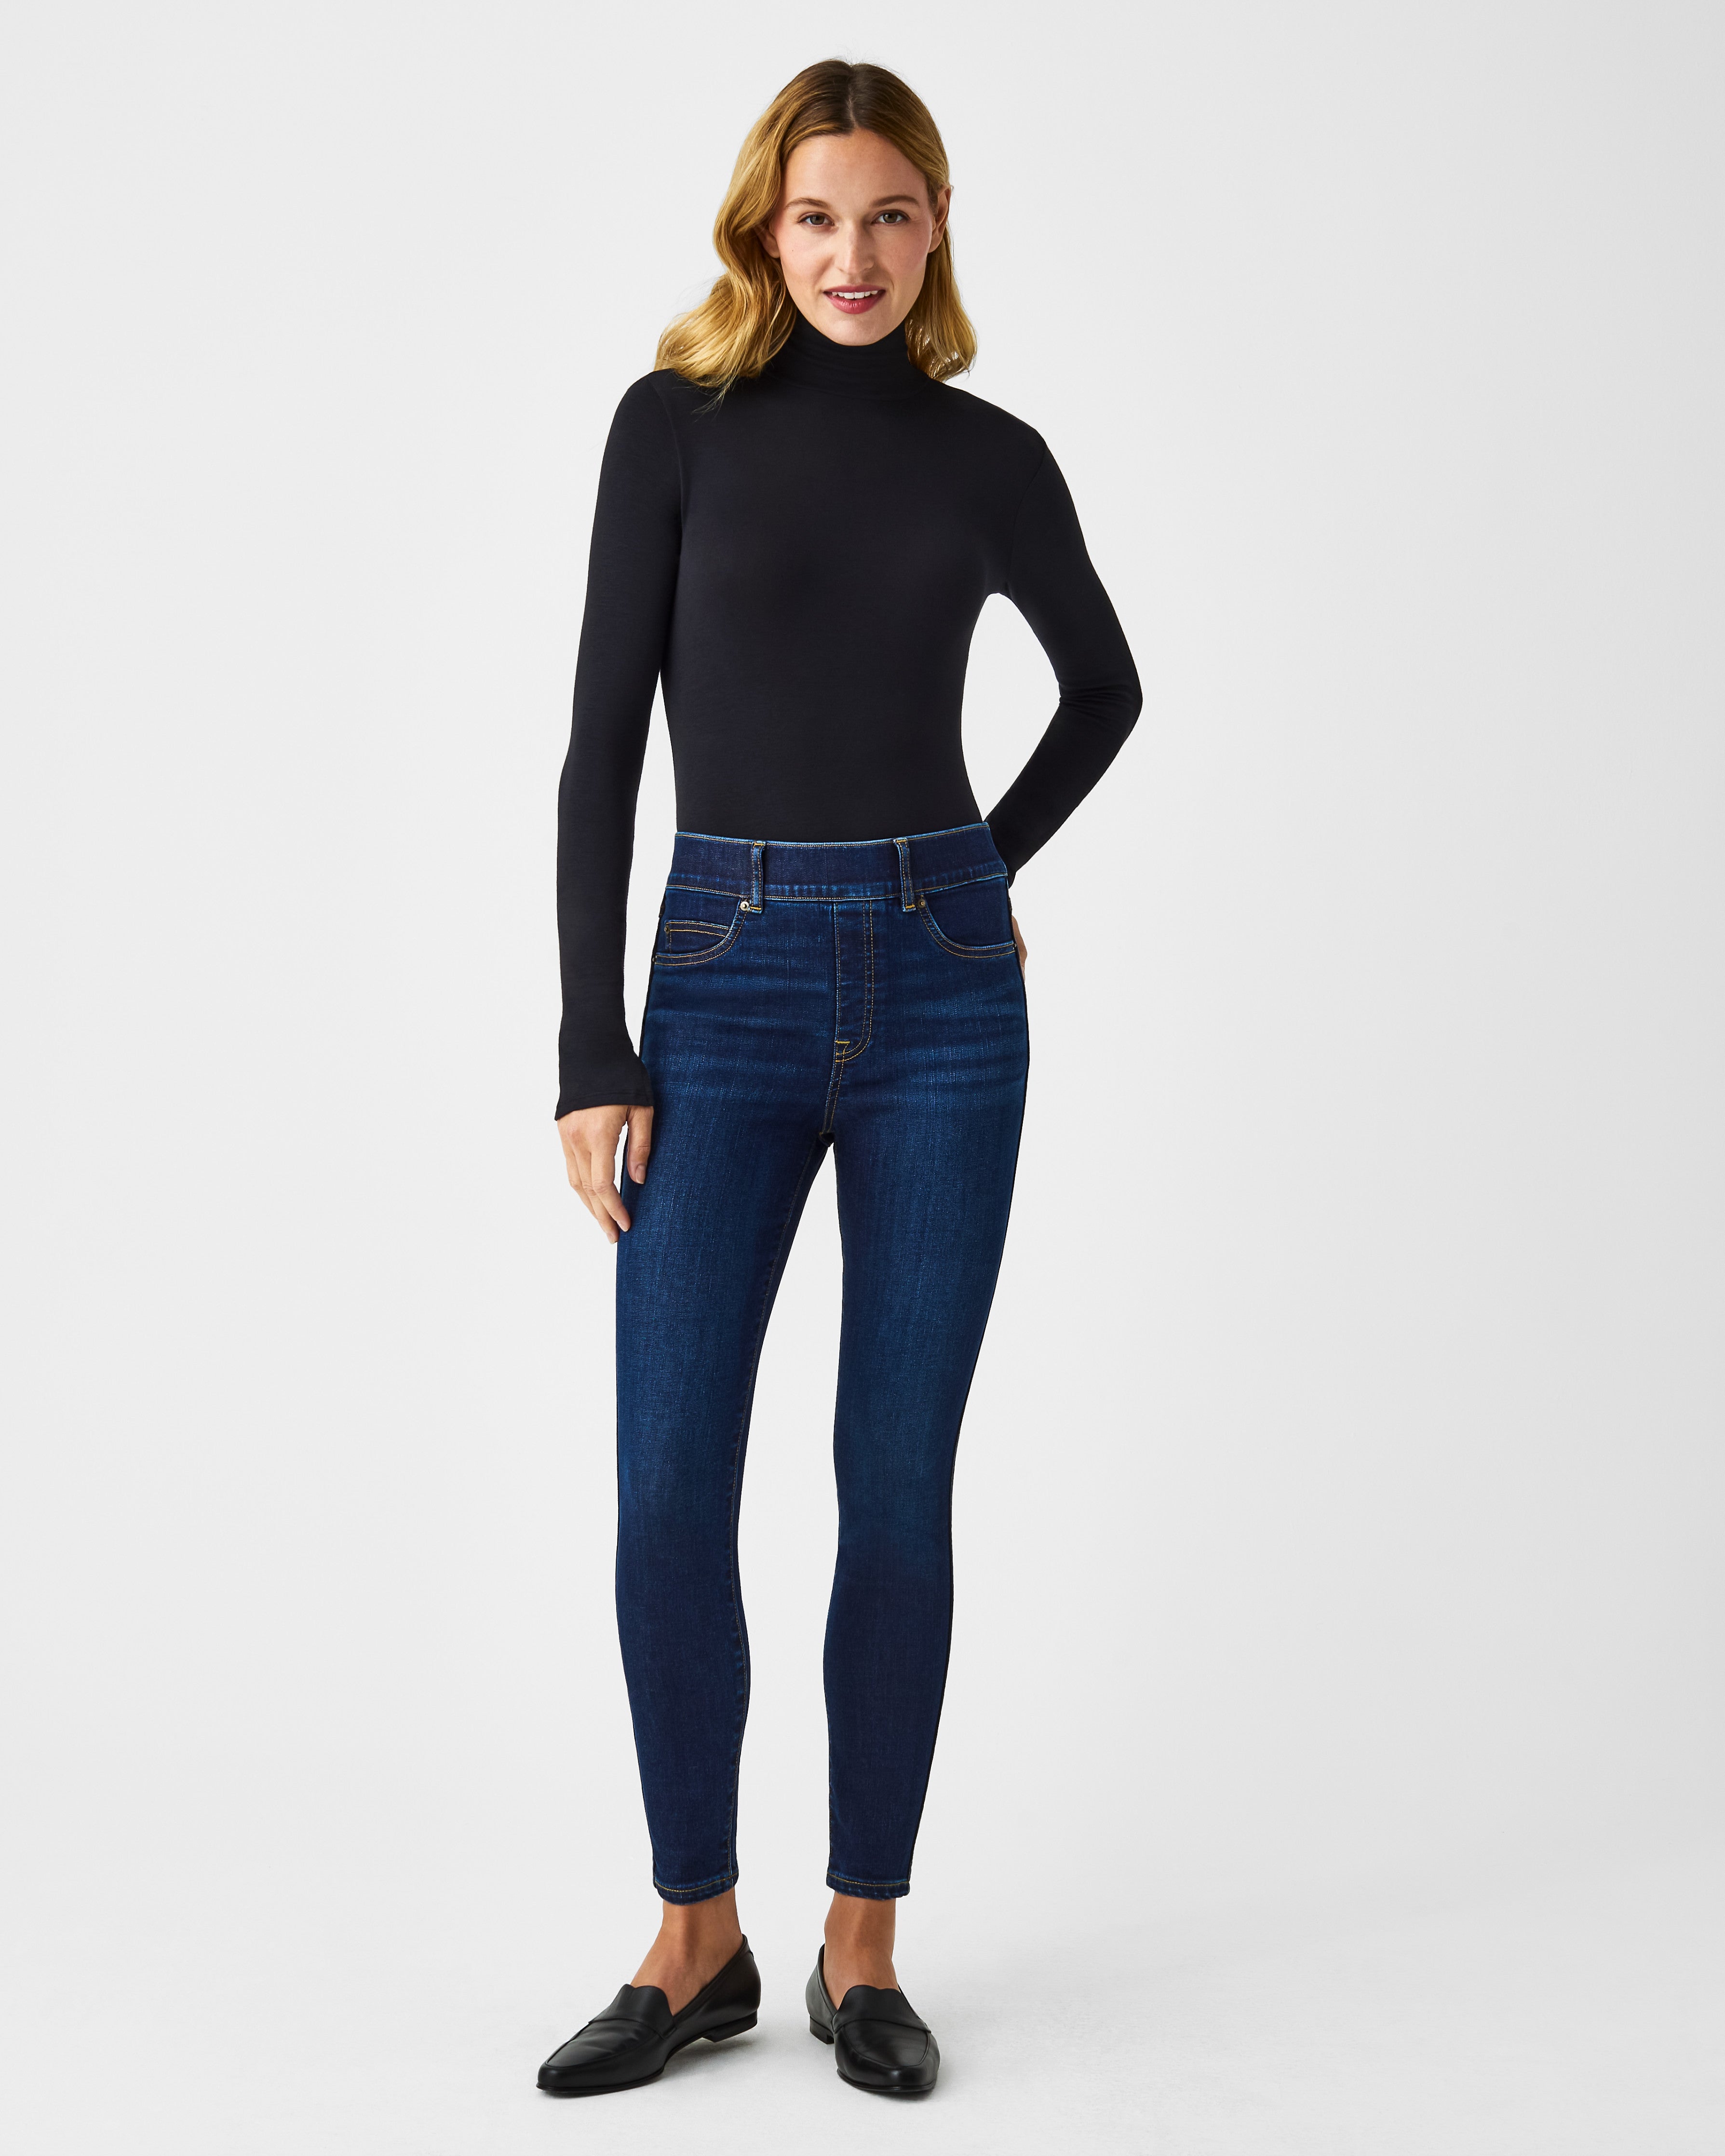 Spanx Women's Ankle Leather-like Skinny Pants Black – The Blue